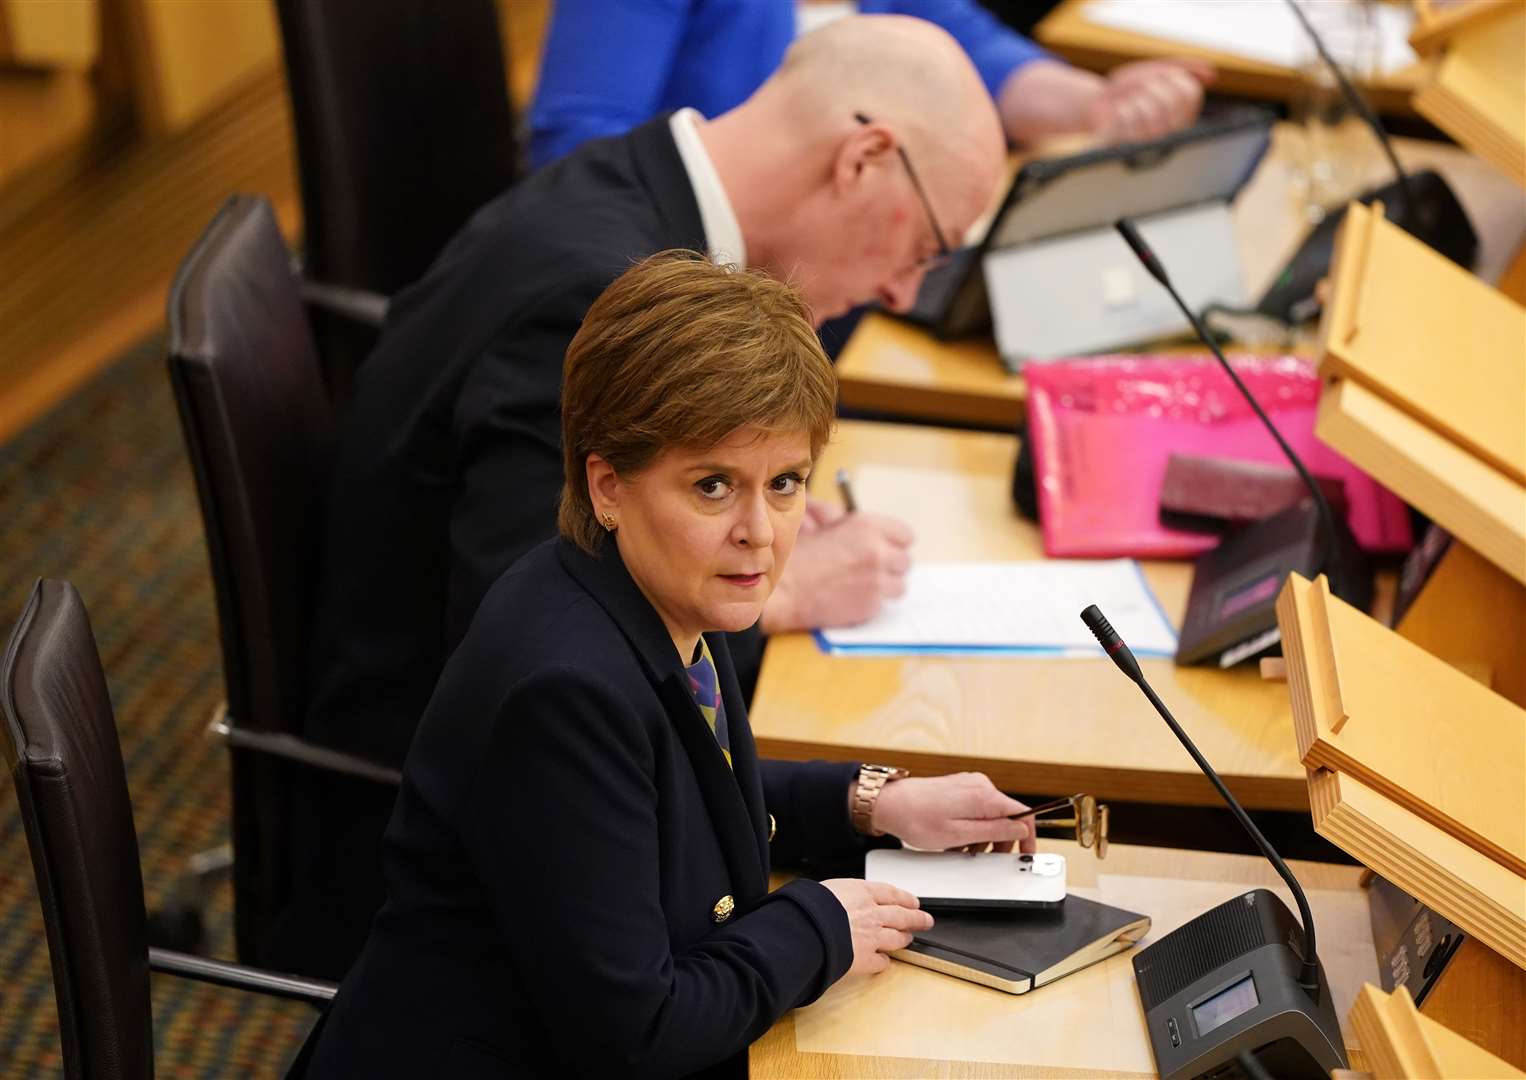 The latest phase of the inquiry will hear from Nicola Sturgeon, who was Scotland’s first minister throughout the pandemic (PA)